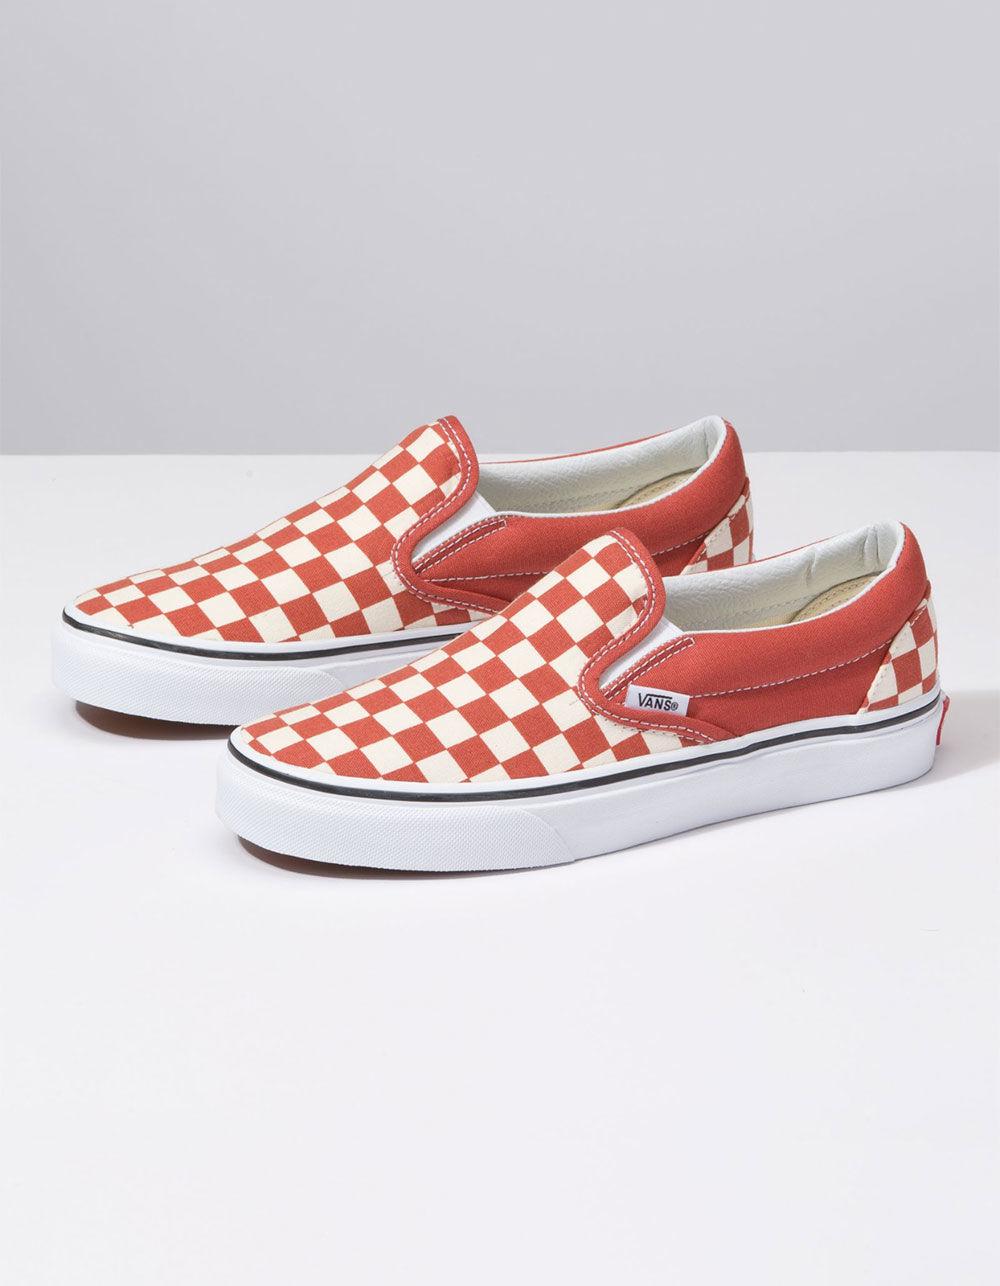 red checkerboard vans tilly's